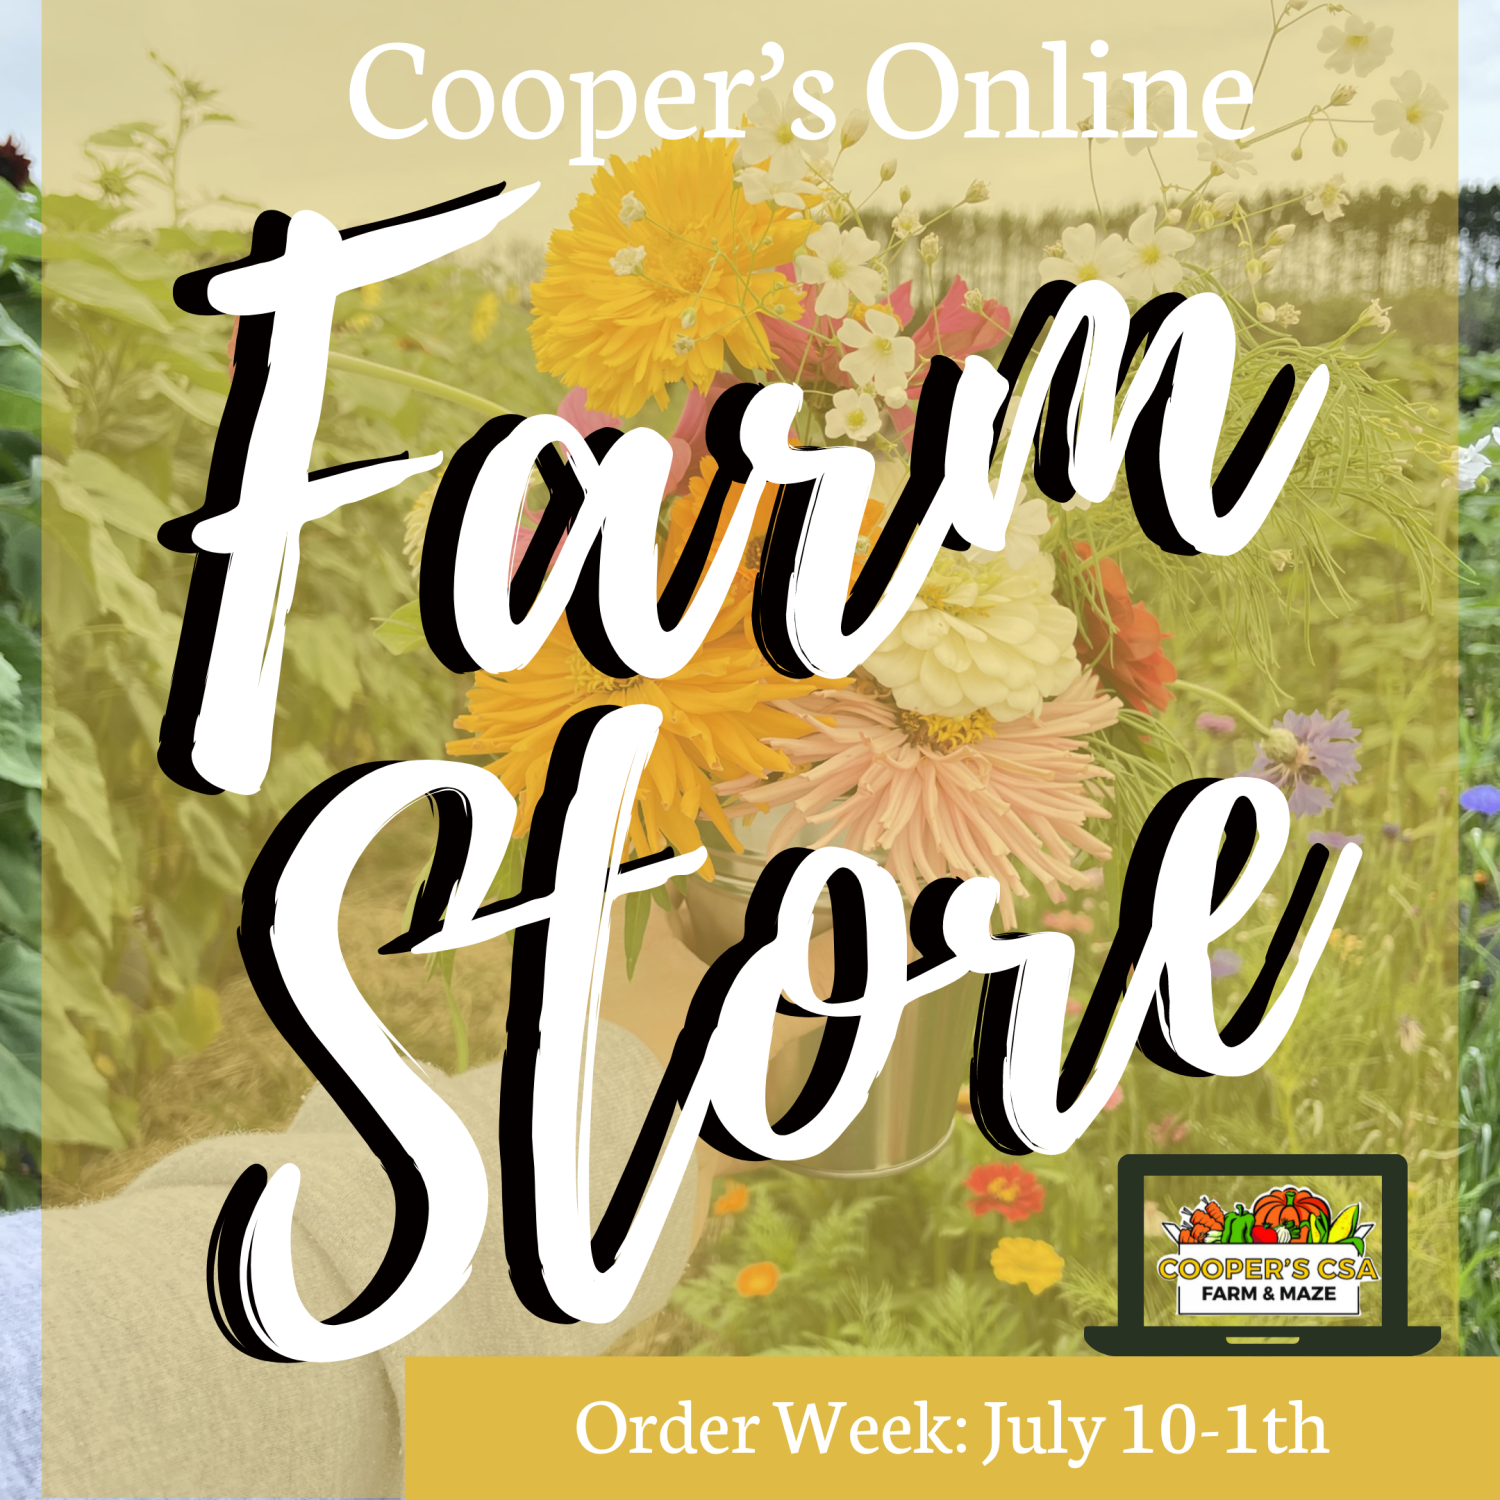 Previous Happening: Coopers CSA Online FarmStore- Order week July 10-13th